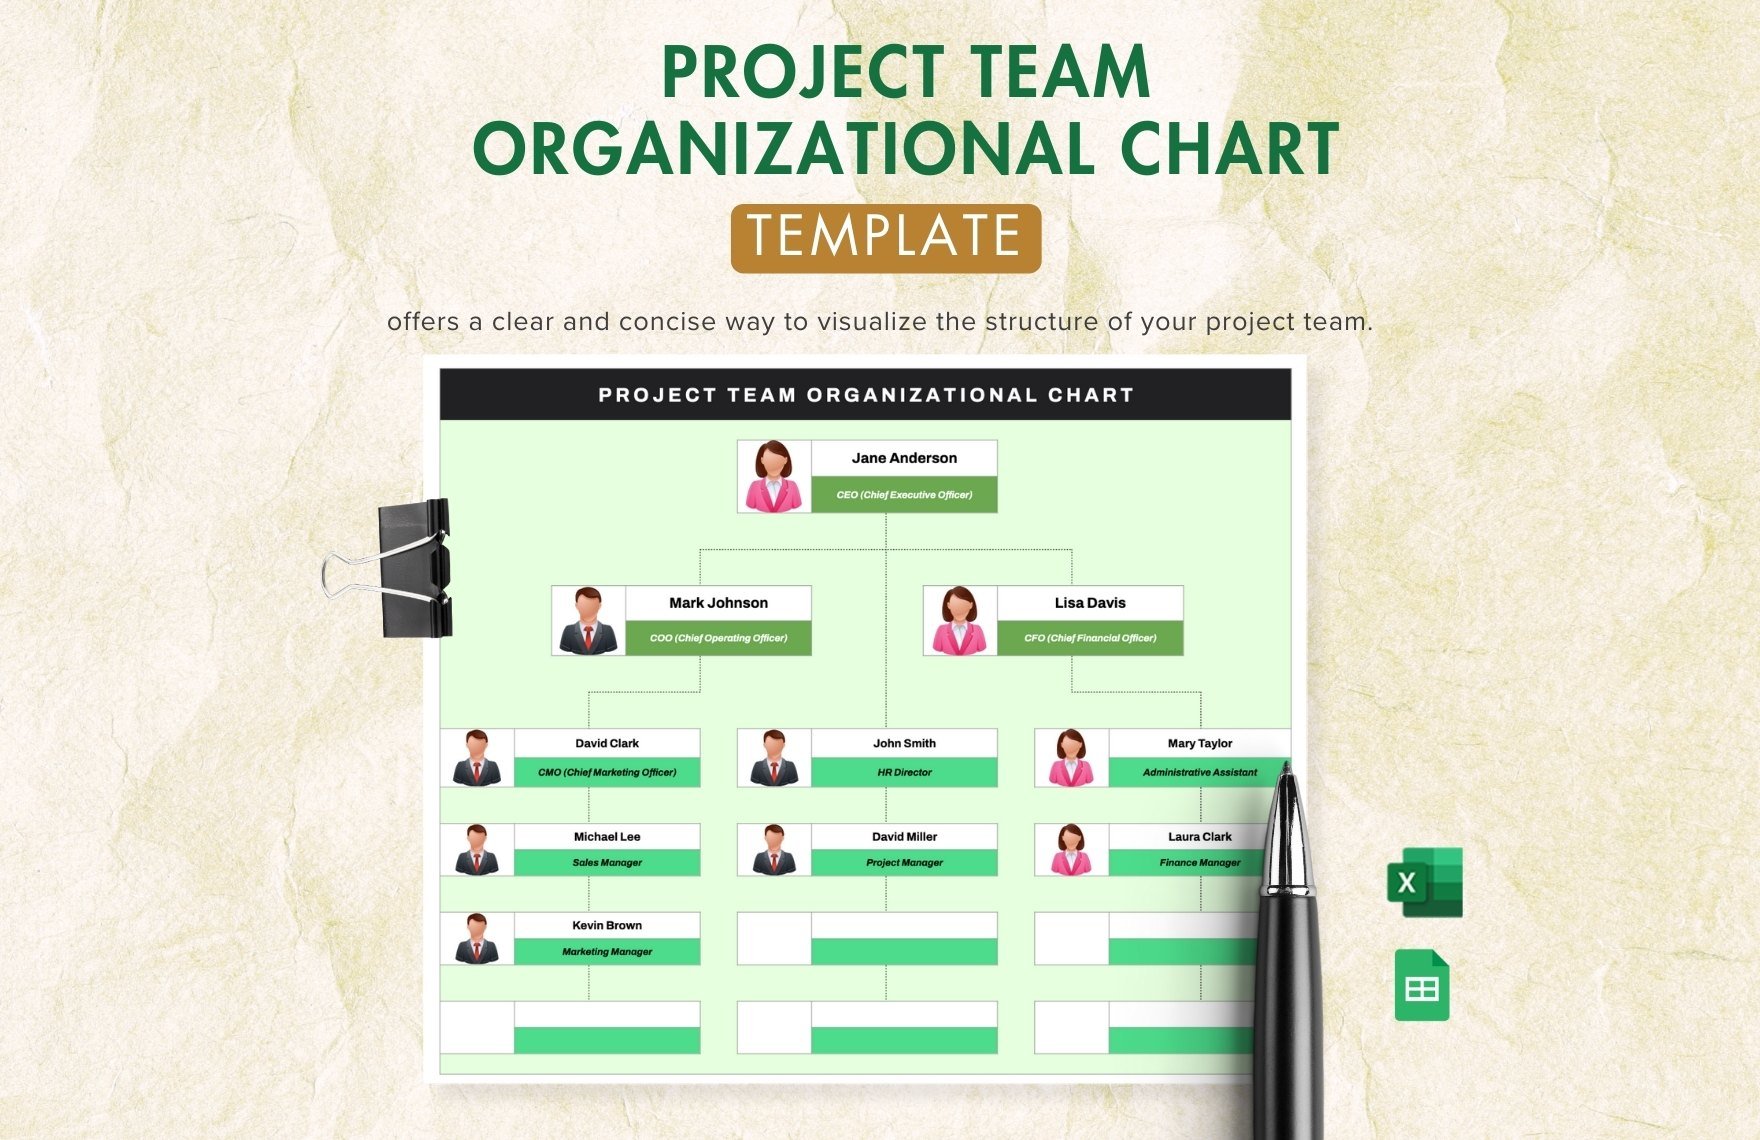 Project Team Organizational Chart Template in Excel, Google Sheets